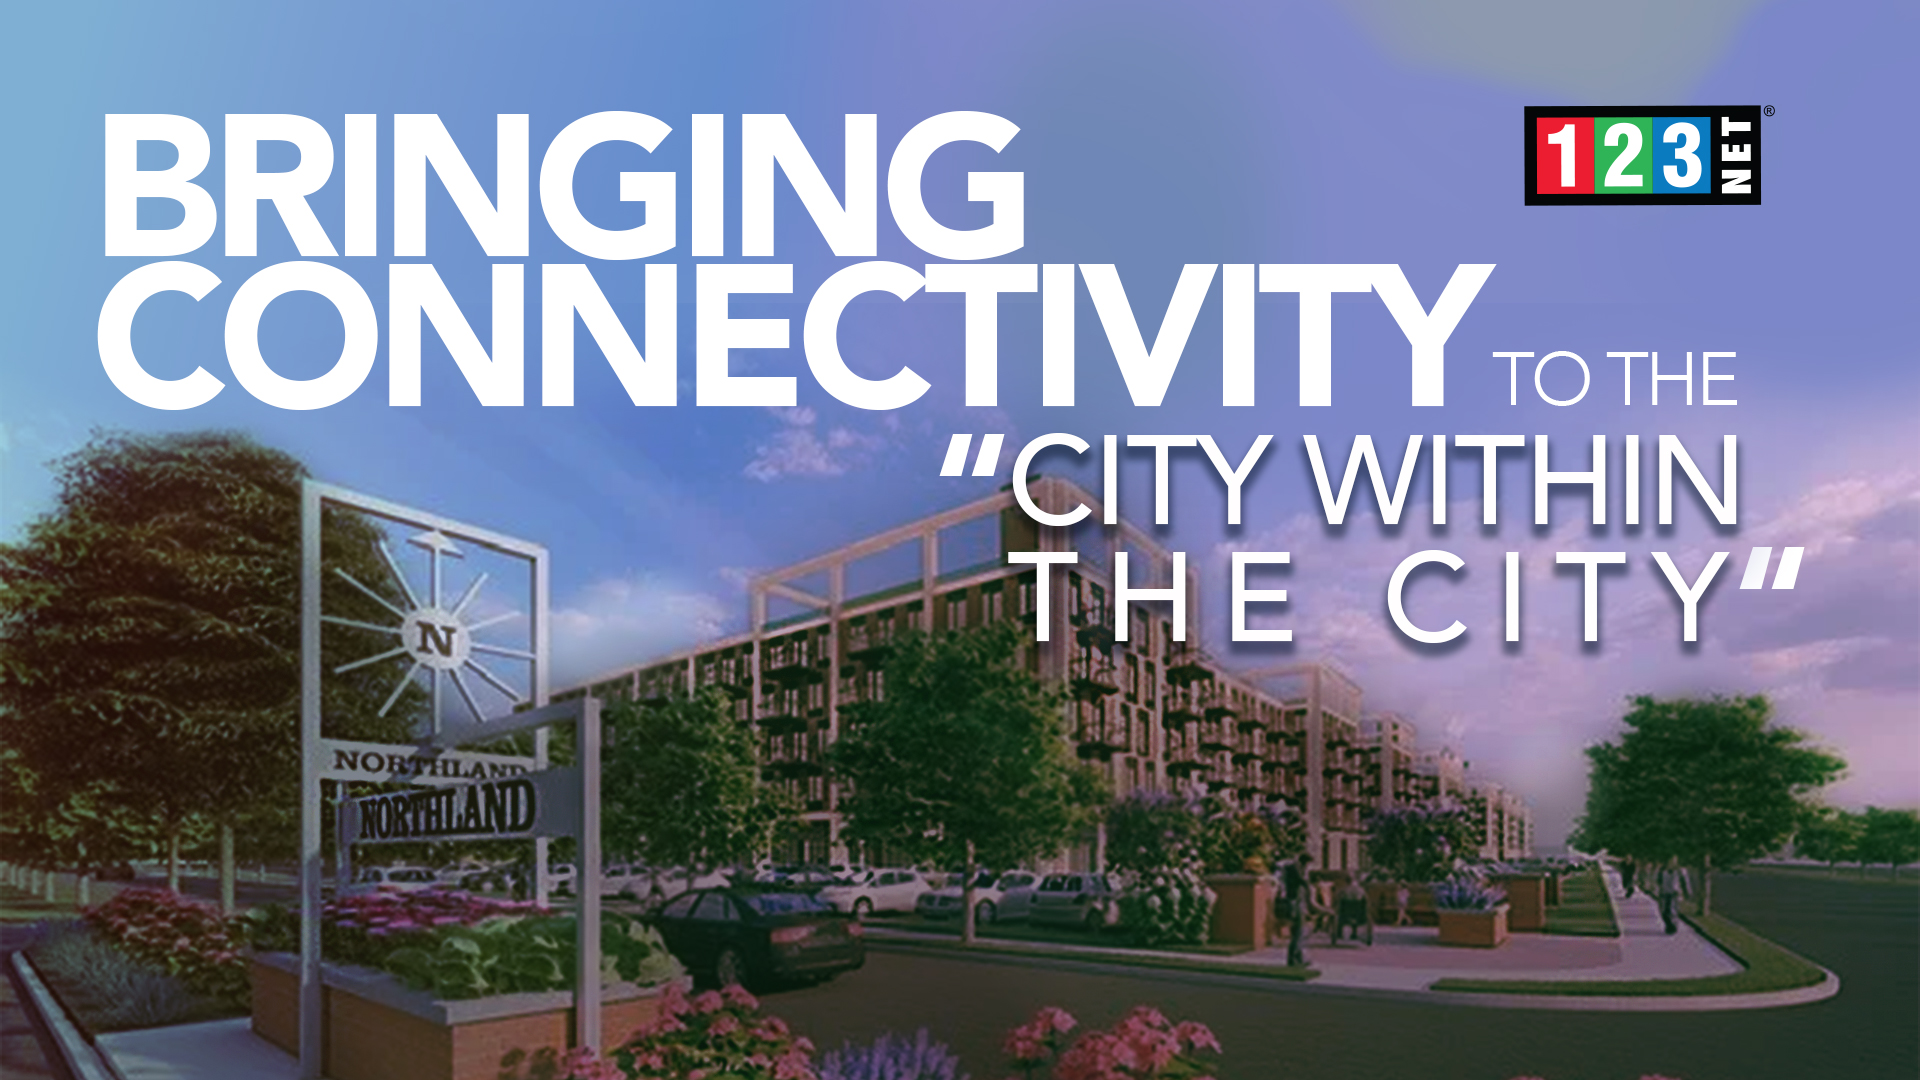 123NET Bringing High-Speed Internet to “the City Within the City” at the Northland City Center